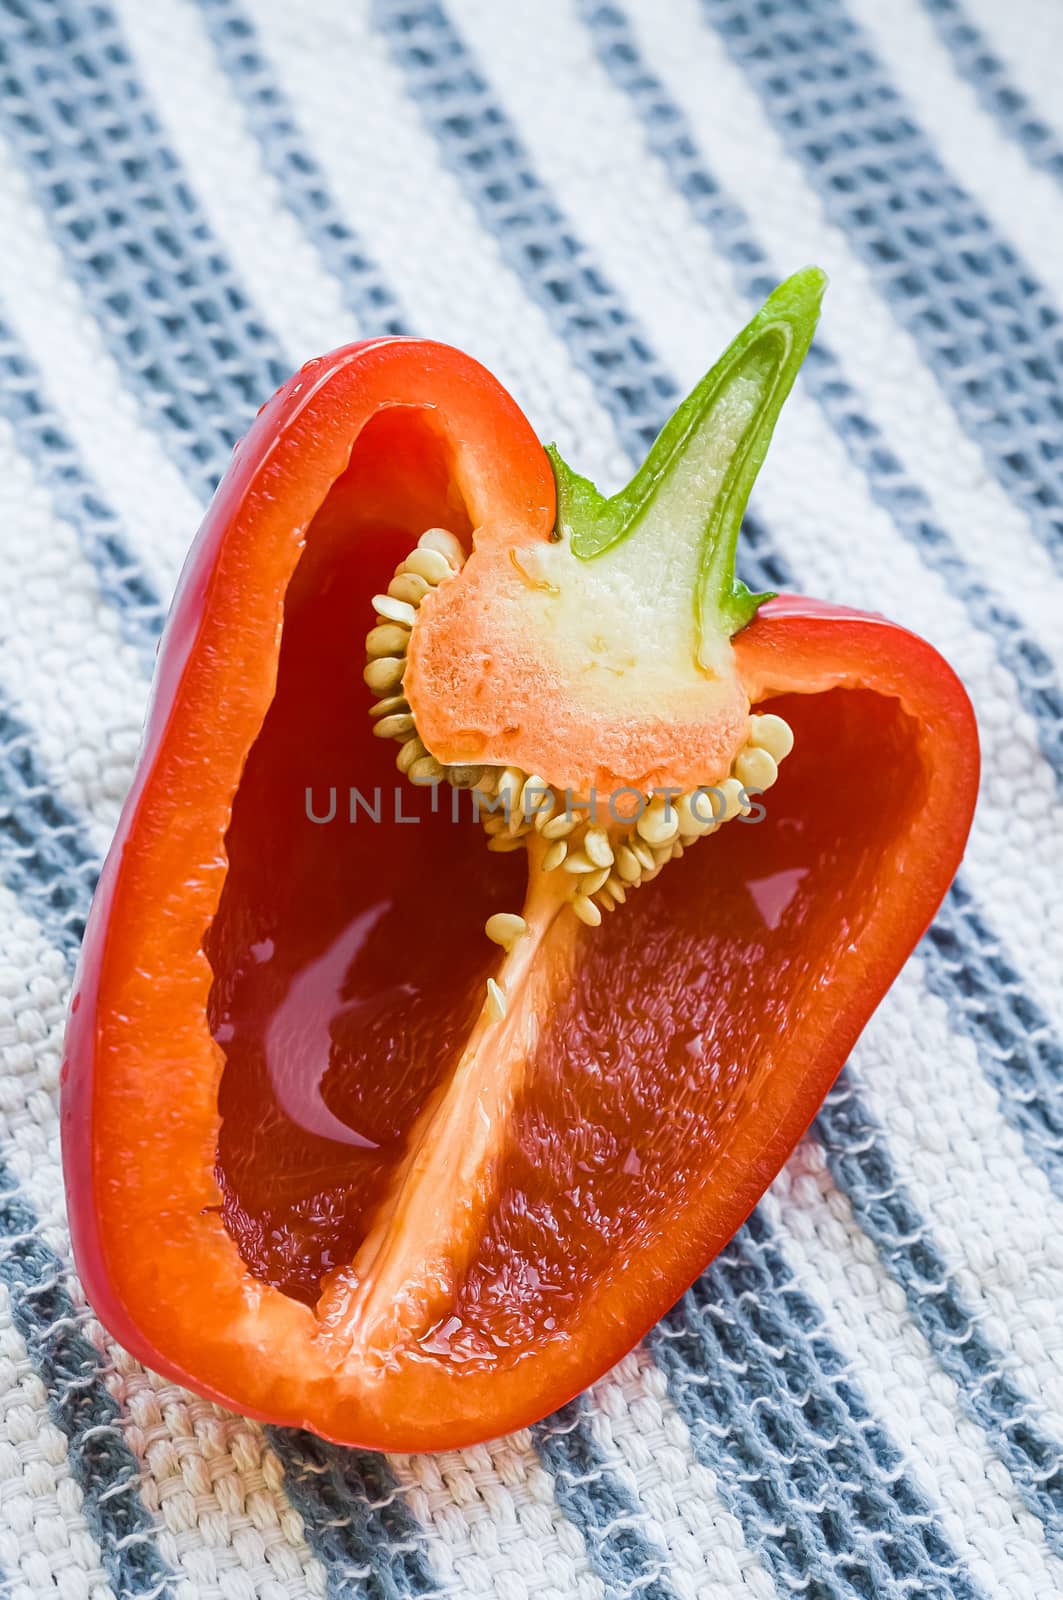 A sweet red bell pepper cut in two parts and showing the seeds and the internal